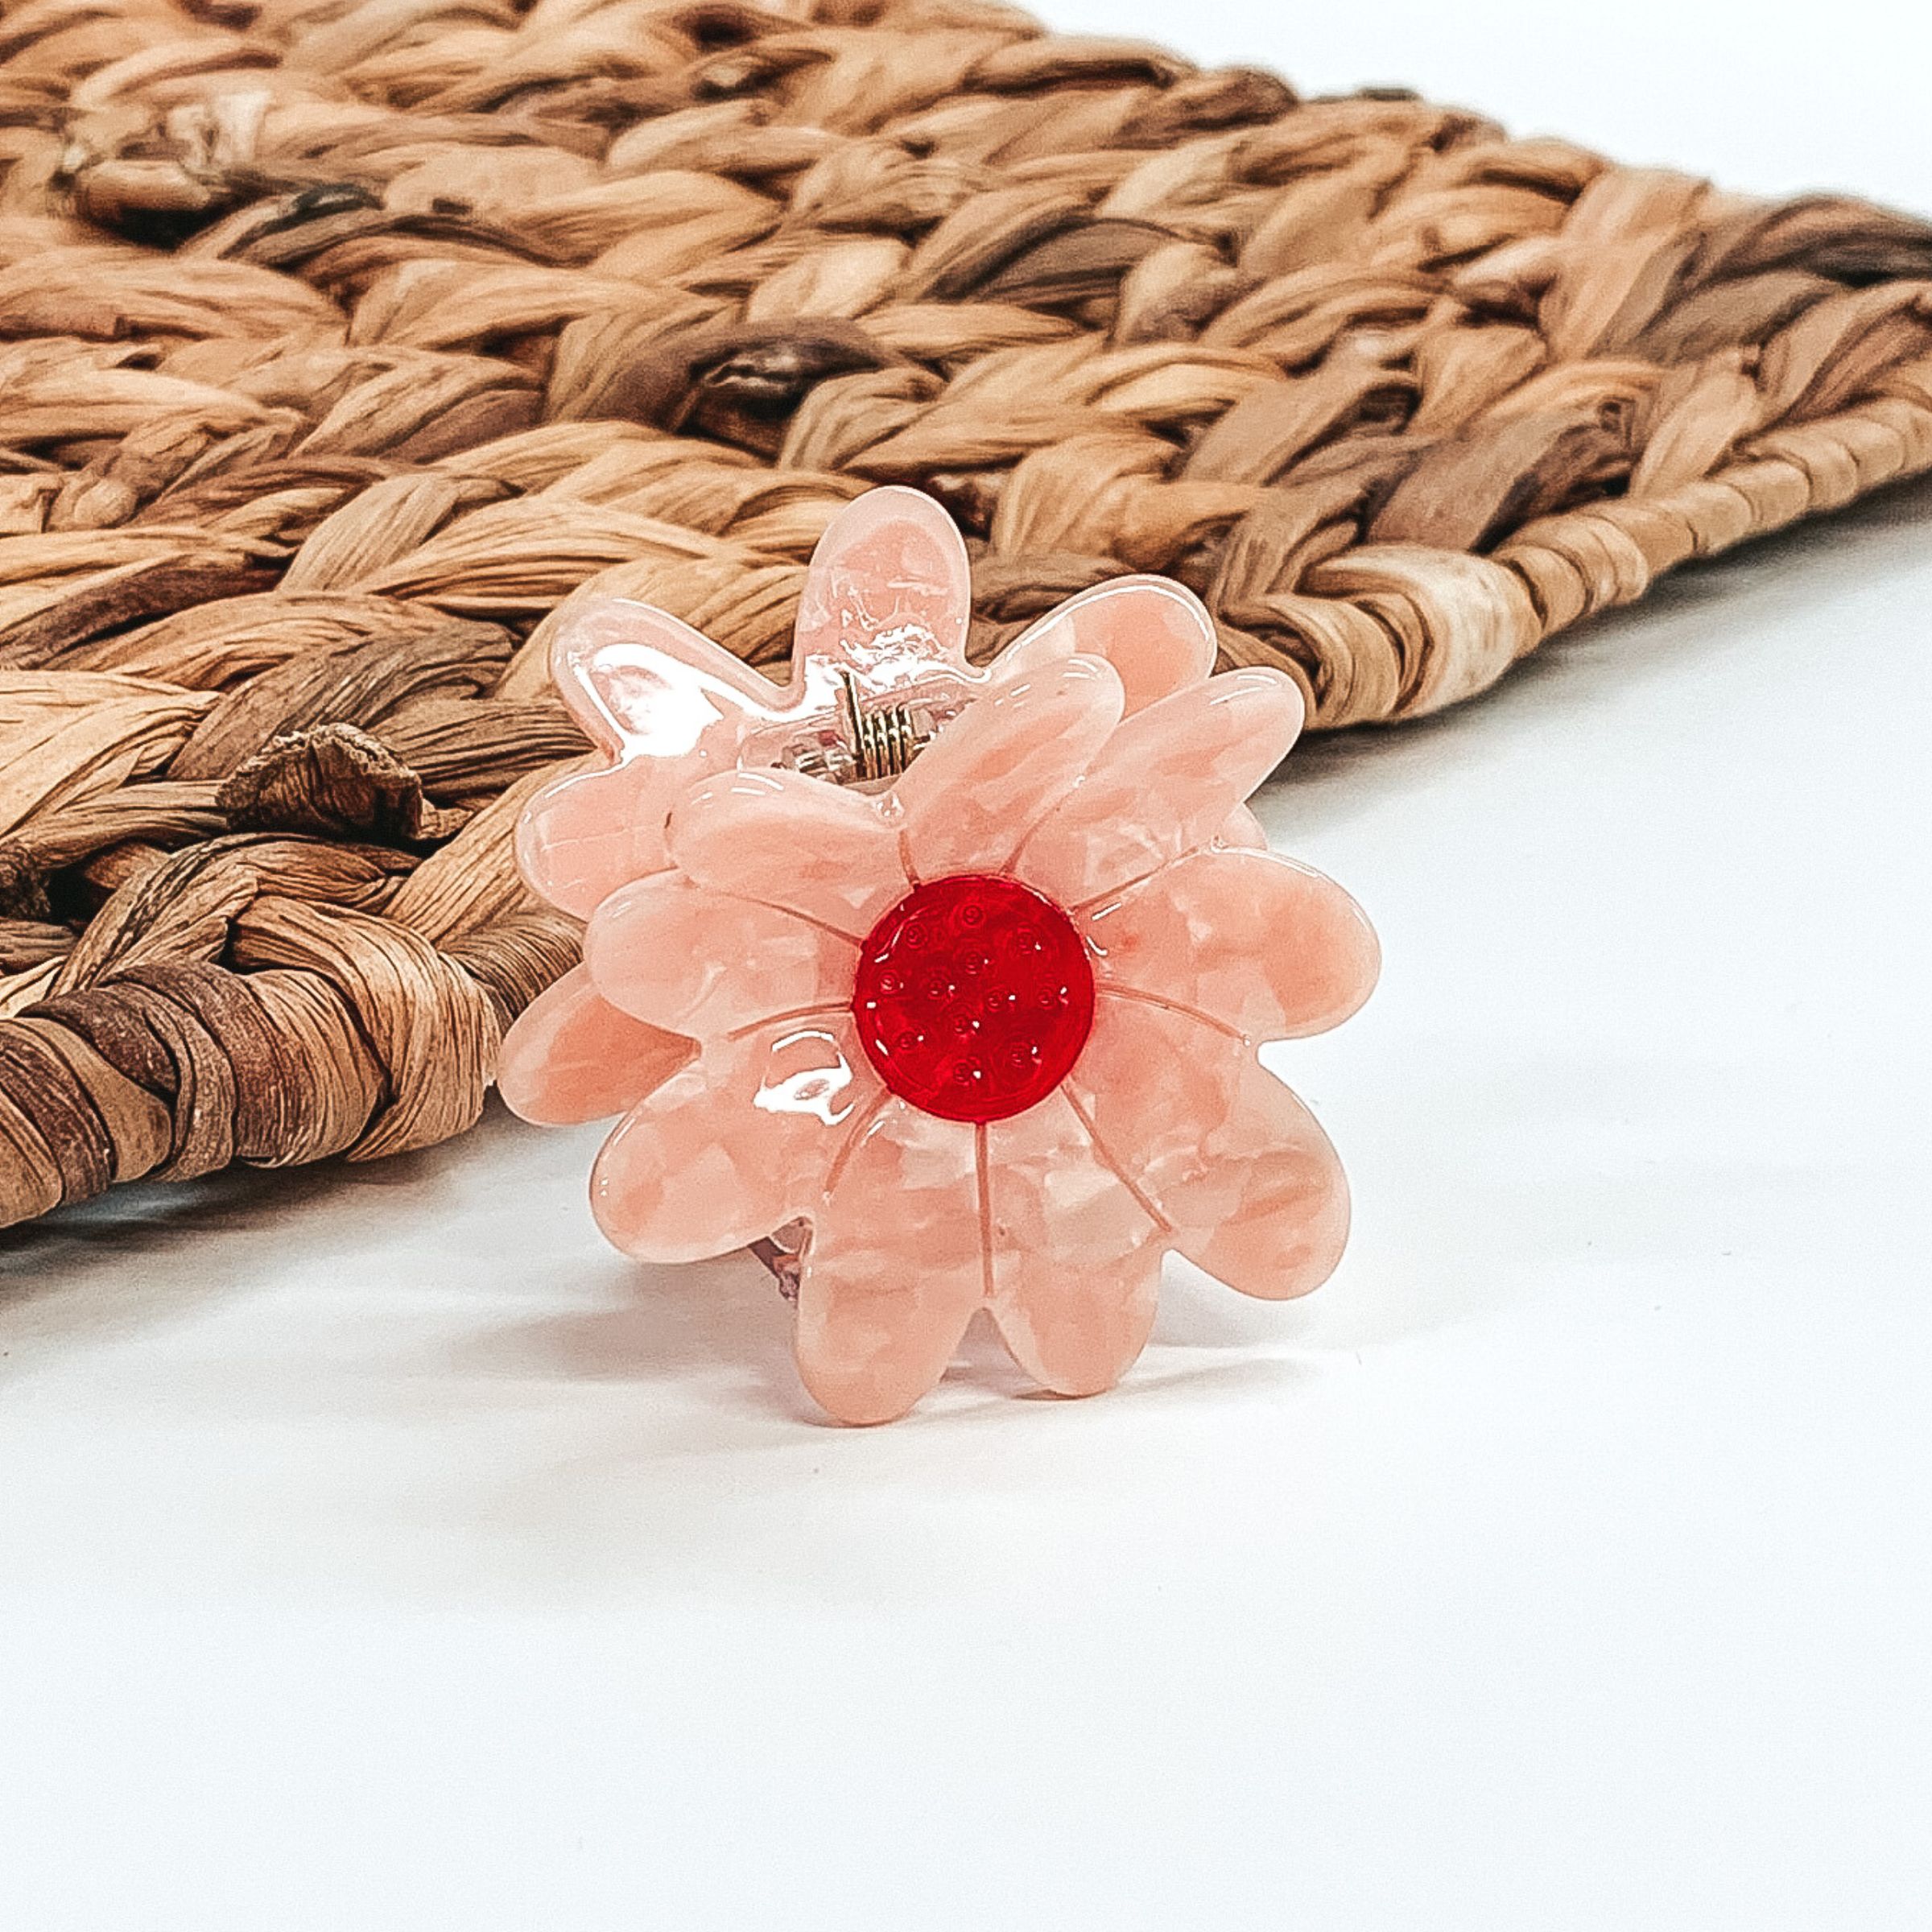 Flower shaped clip in pink with a red center. This clip is pictured on a white background with a basket weave behind the clip.